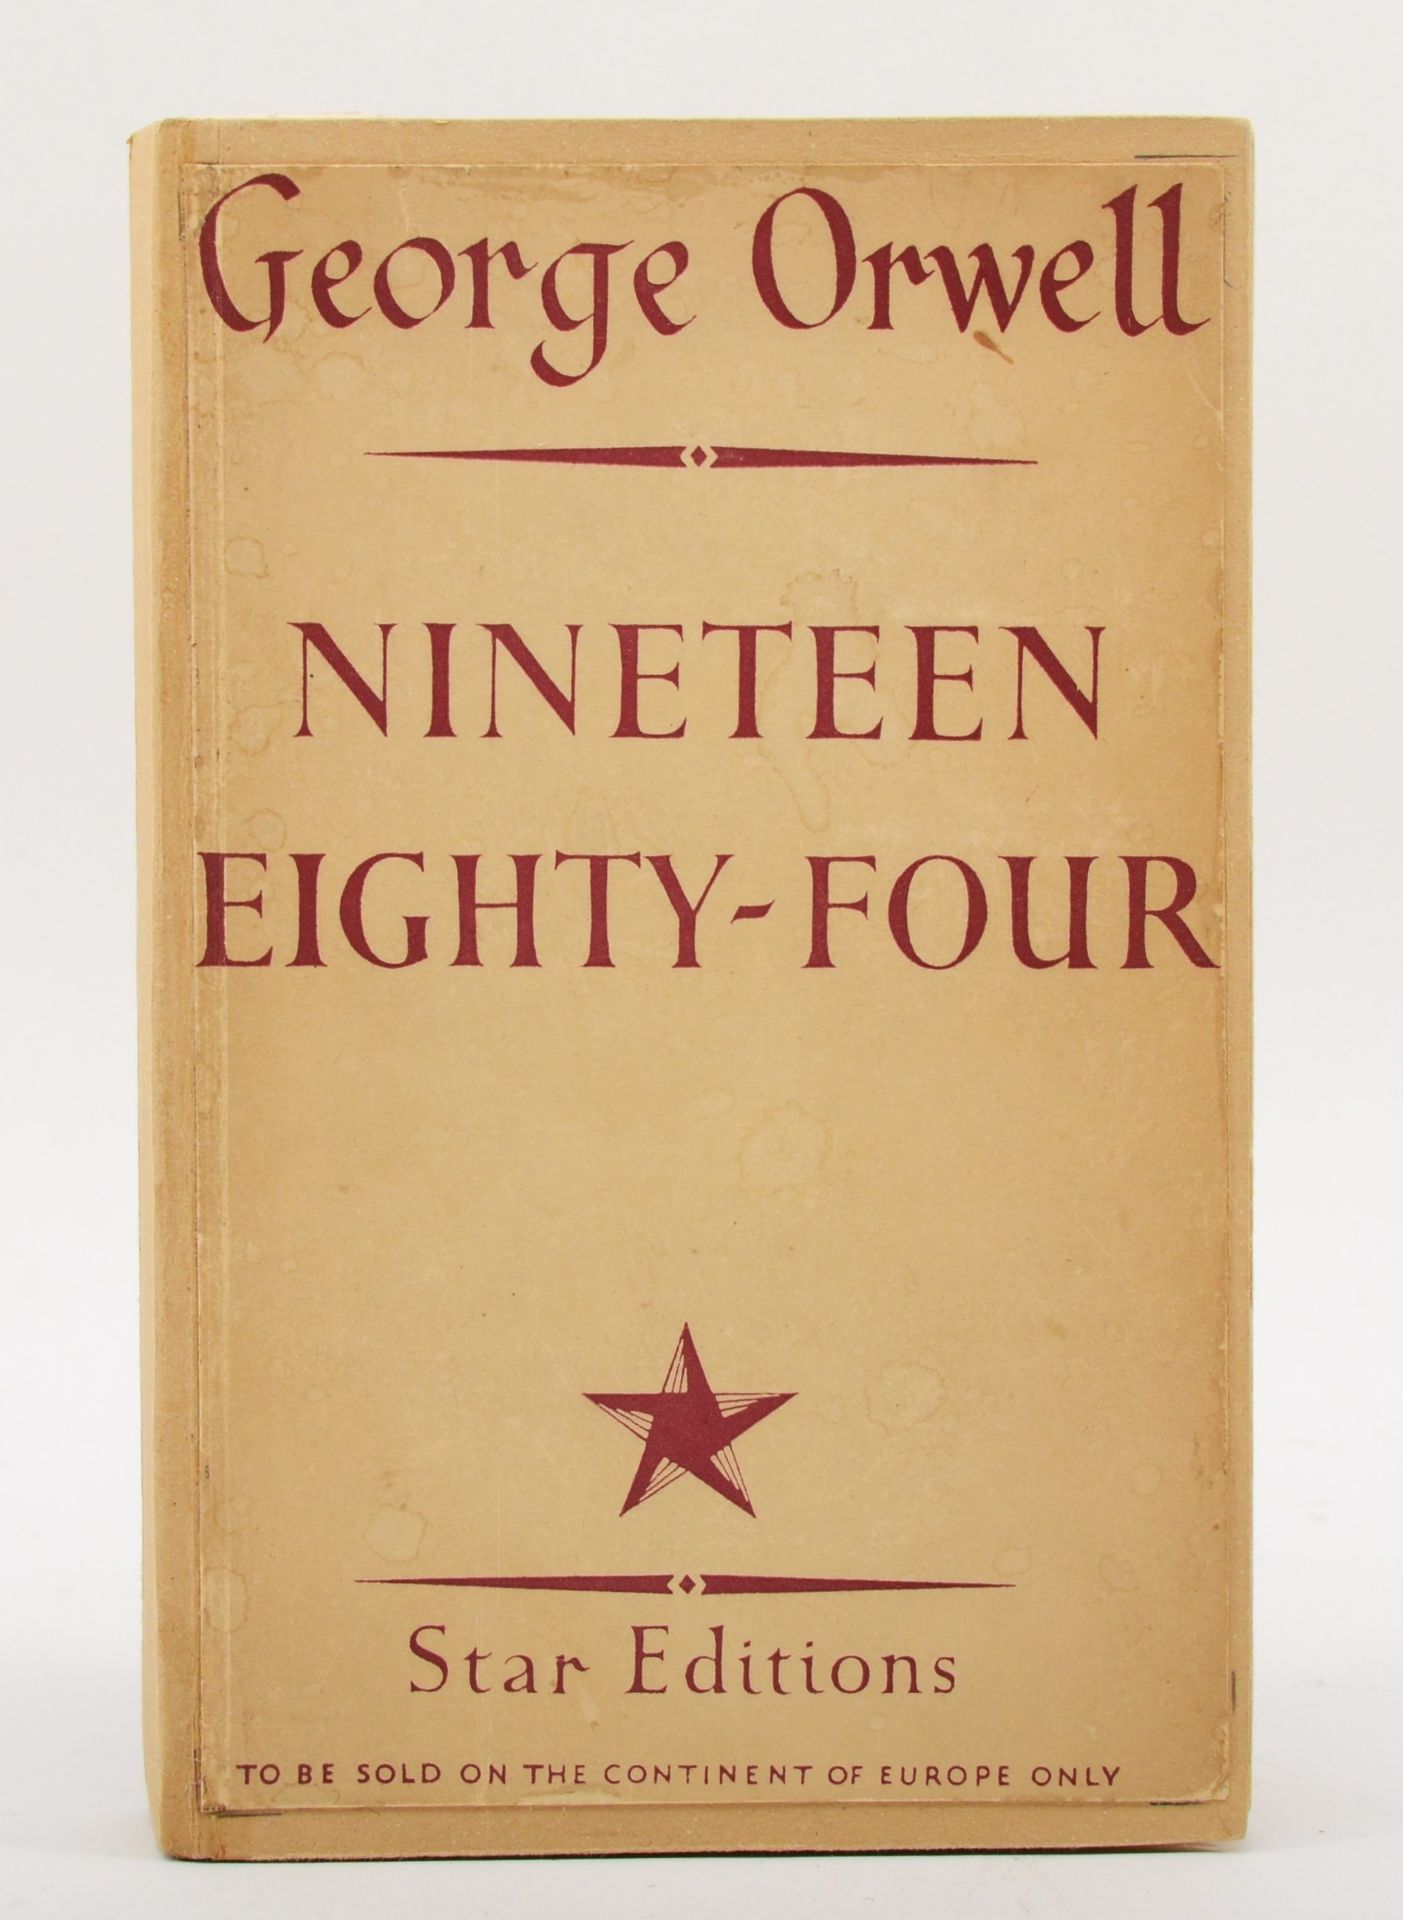 WITHDRAWN FROM AUCTION KOESTLER, Arthur & ORWELL, George. Nineteen Eighty-Four. London. - Image 5 of 10